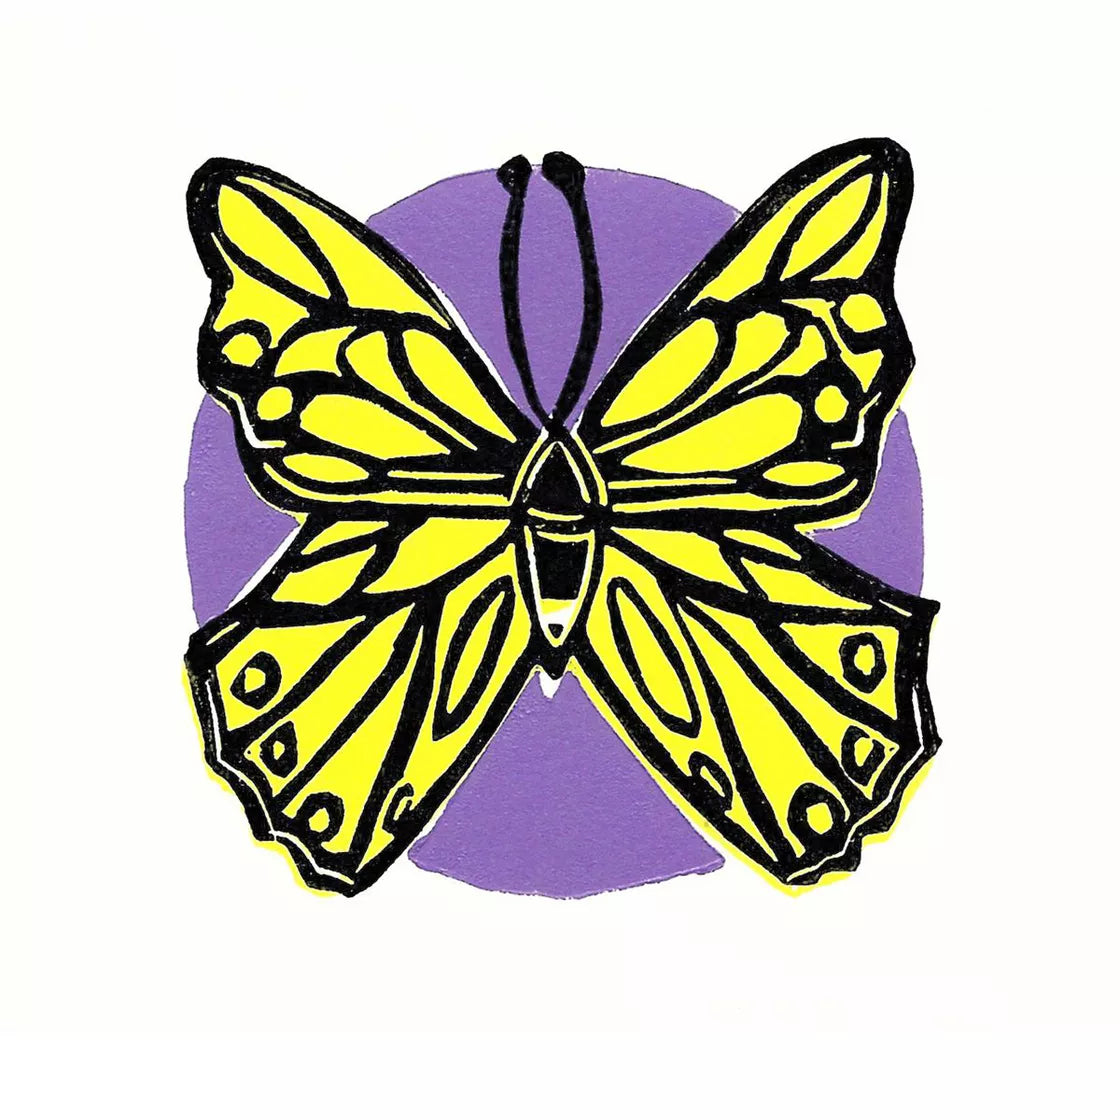 Yellow Butterfly (2018) Linocut print from a limited edition of 30